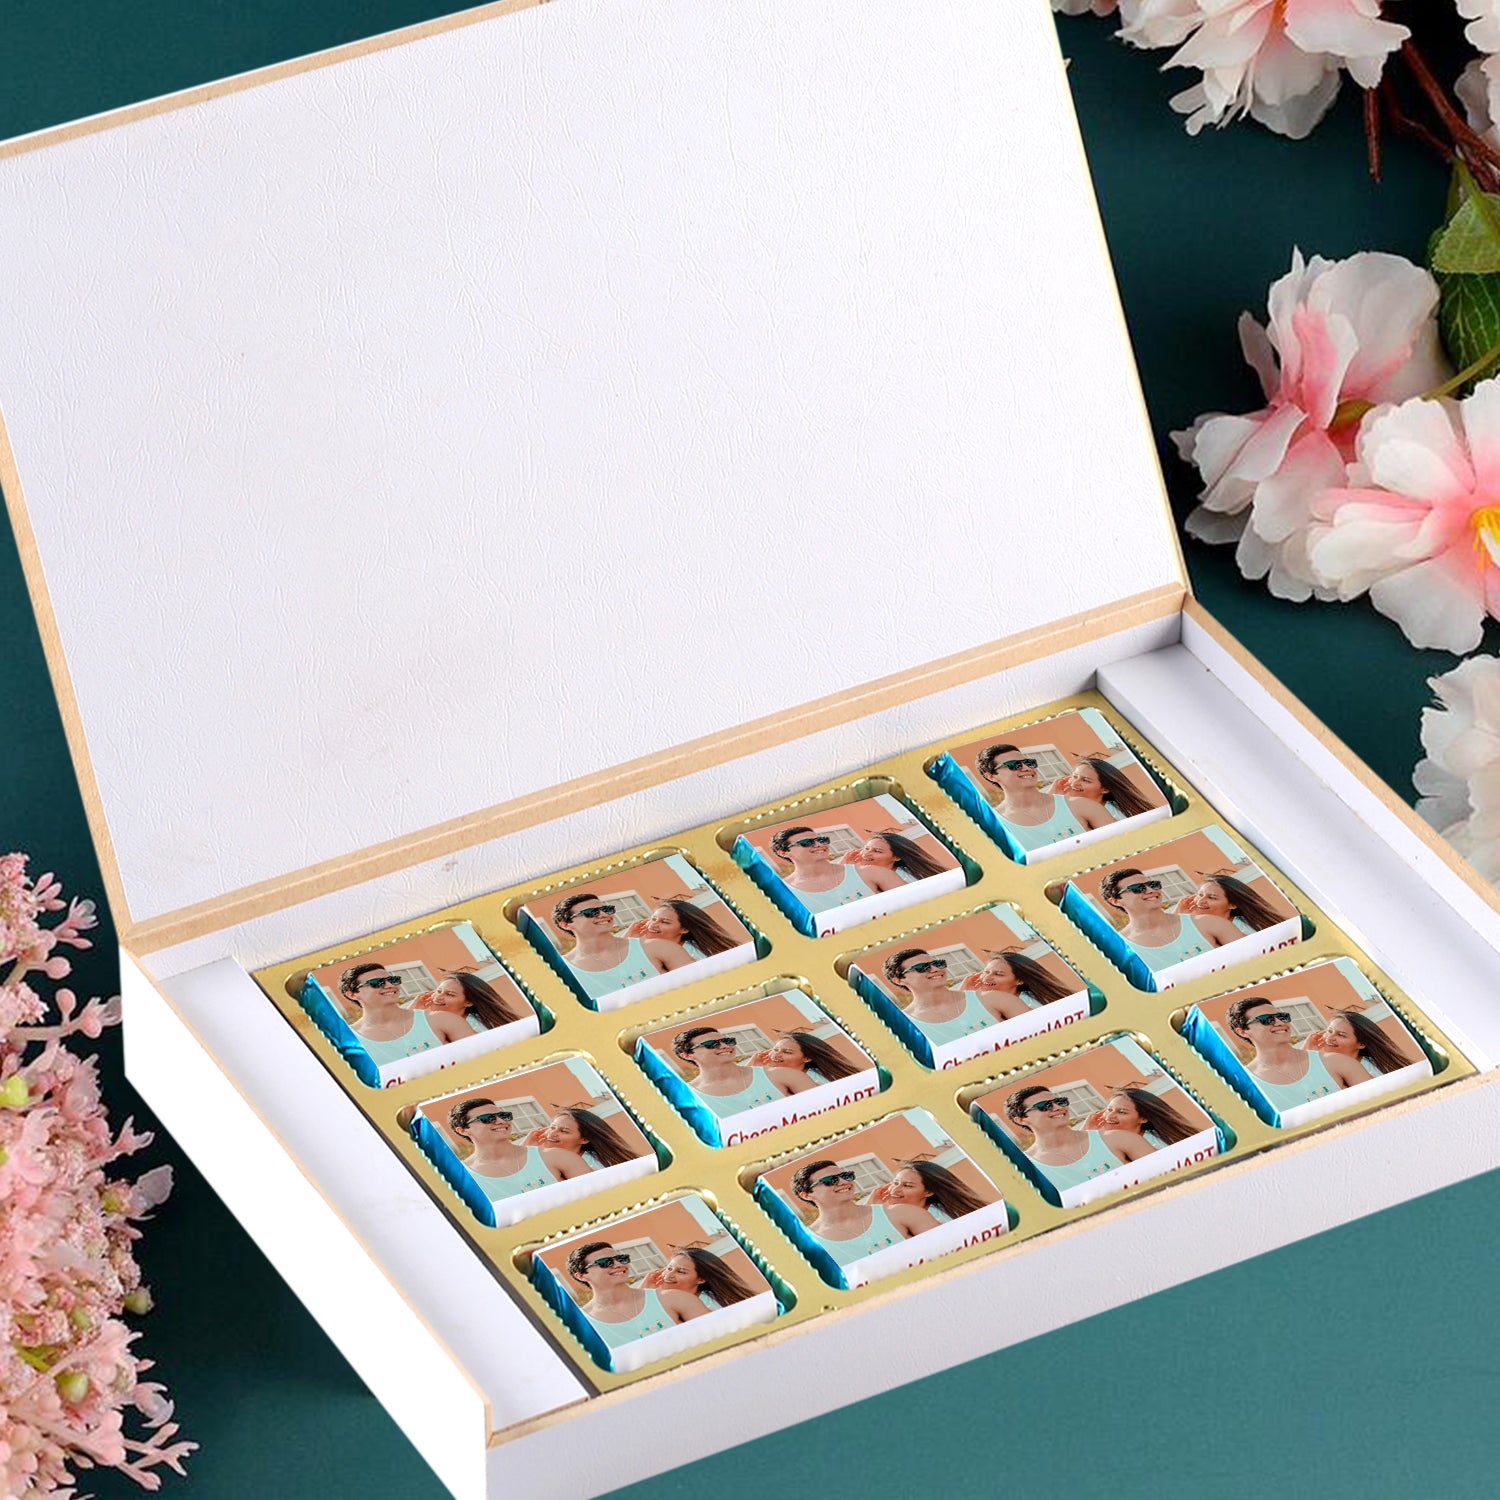 customized photo gifts of Wrapper printed chocolates on the occasion of a wedding anniversary